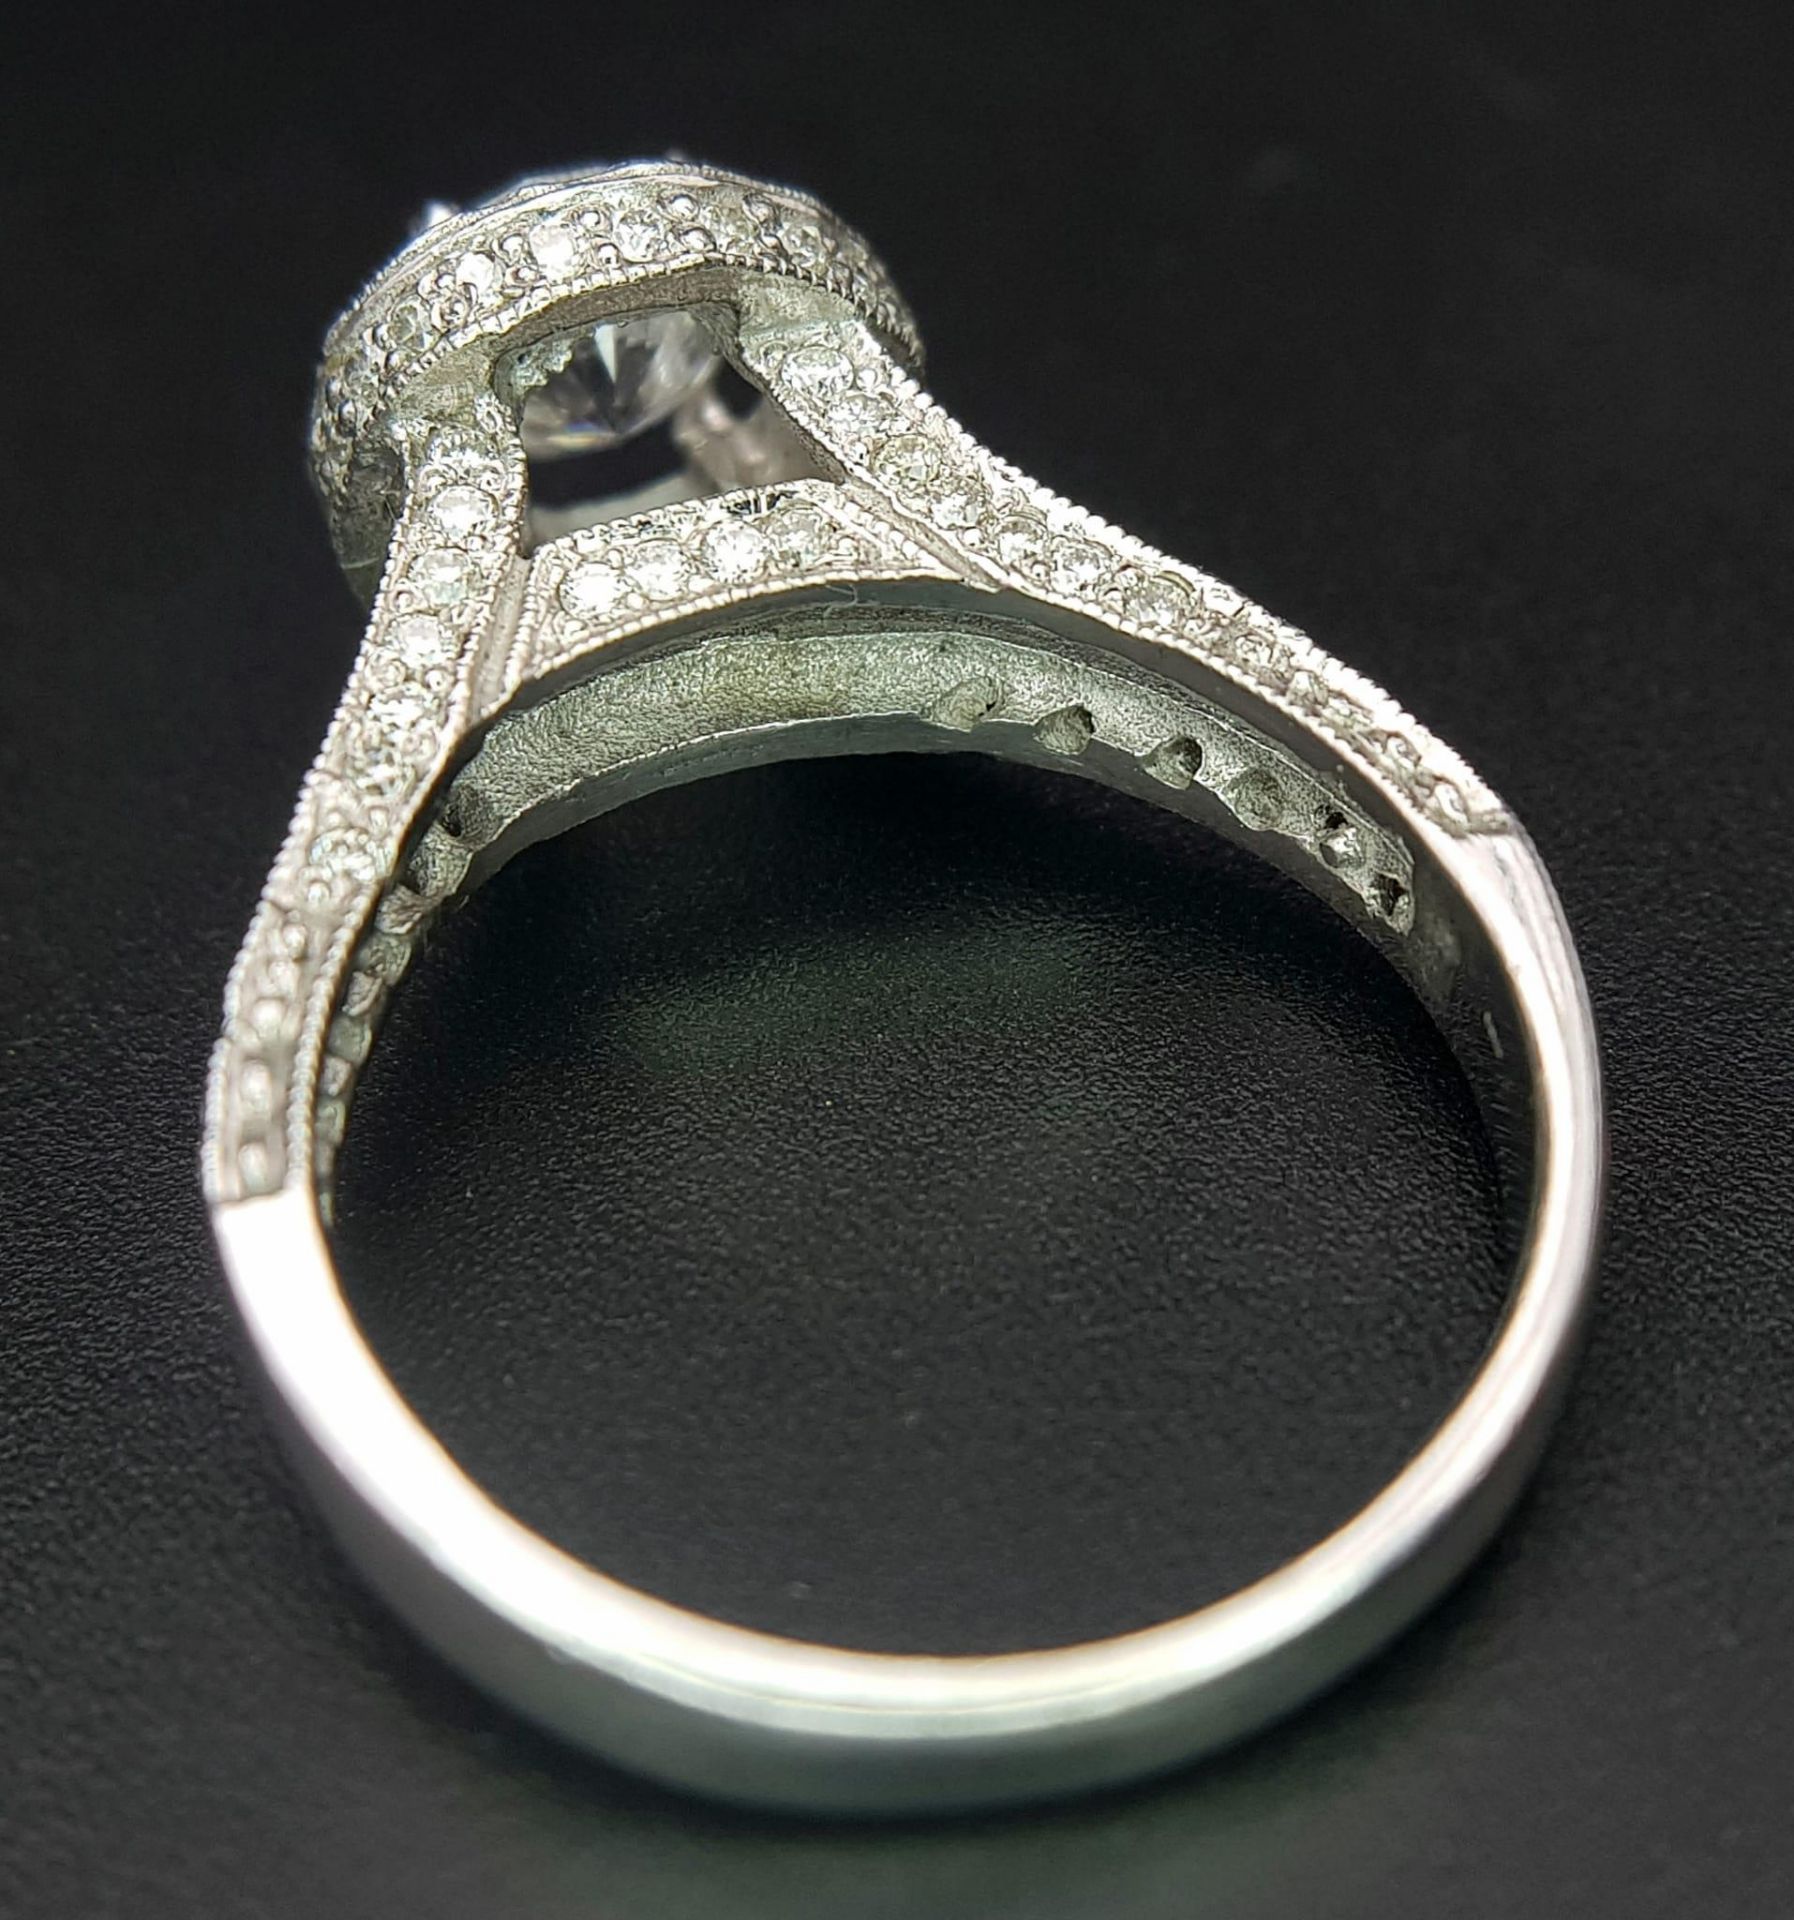 An 18 K white gold ring with a brilliant cut diamond (1.01 carats) surrounded by diamonds on the top - Bild 12 aus 22